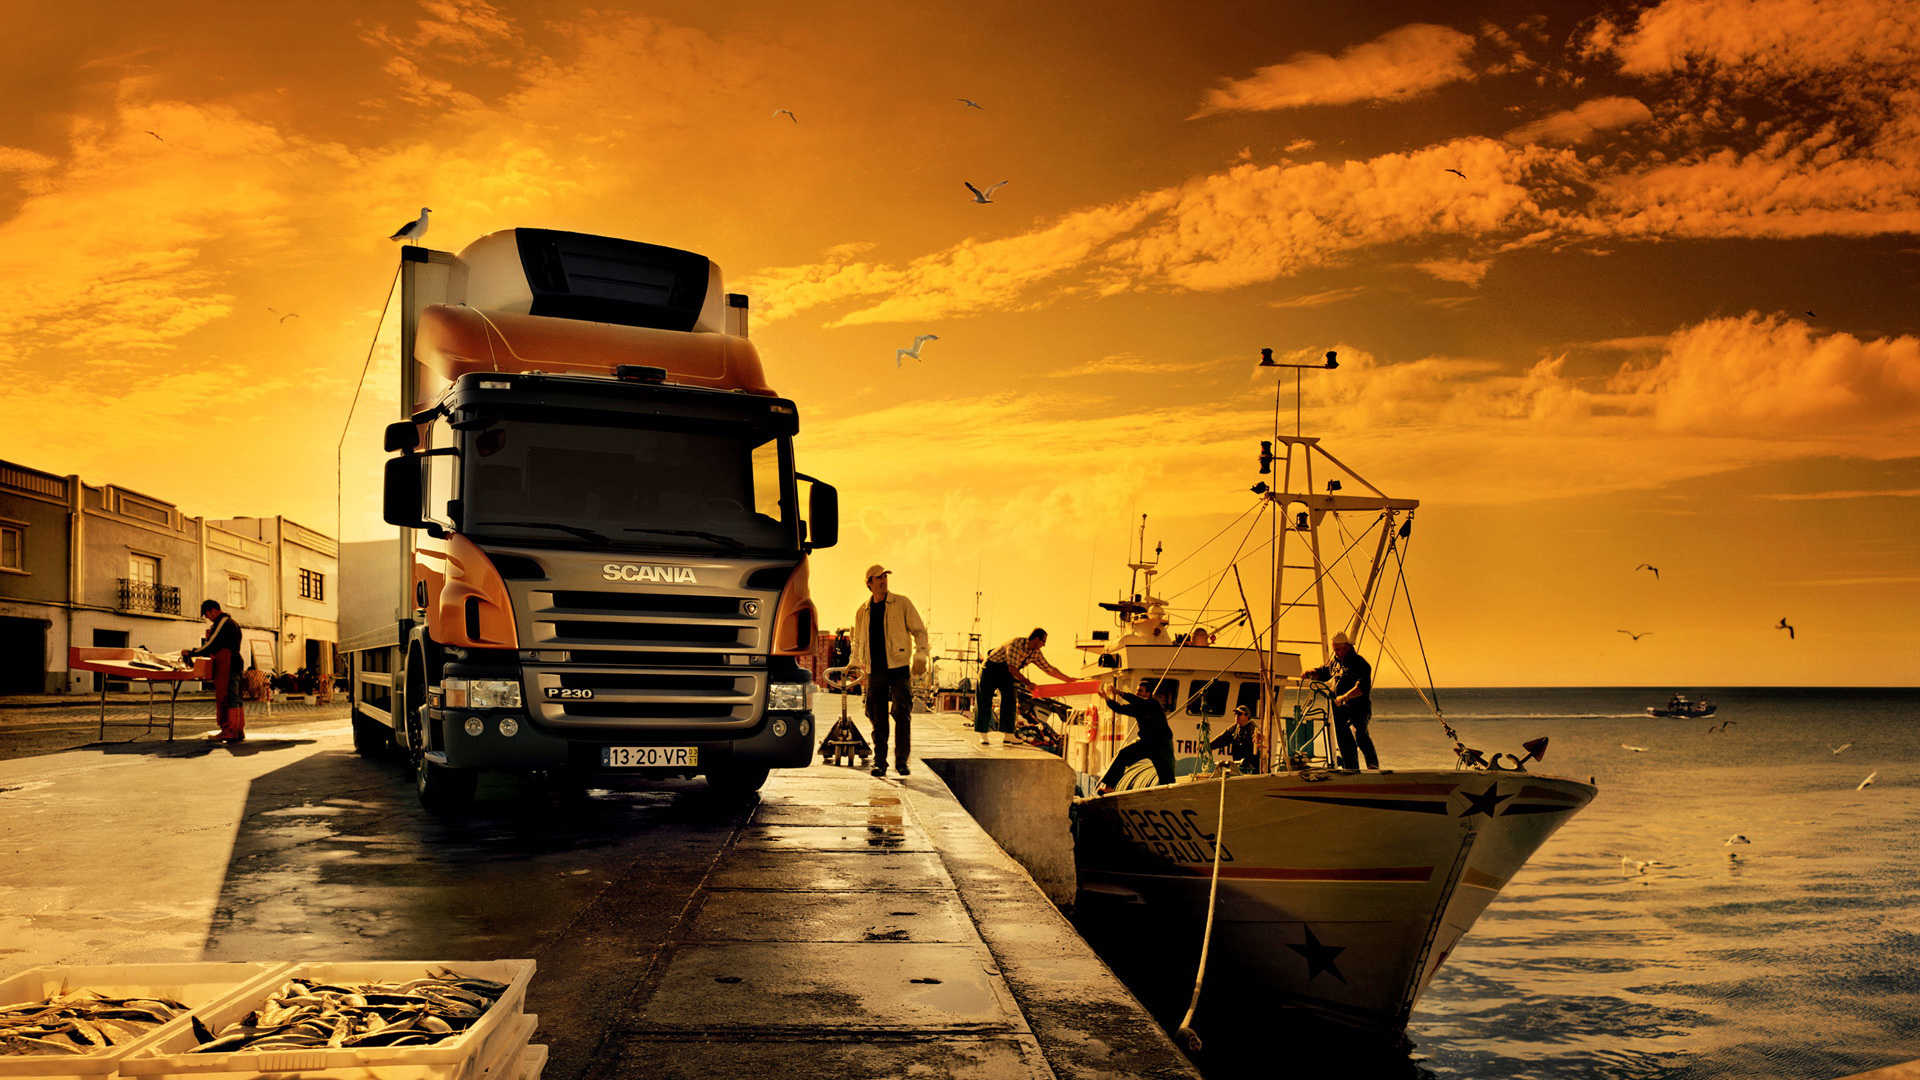 Awesome Orange Scania Truck Wallpaper Pc With